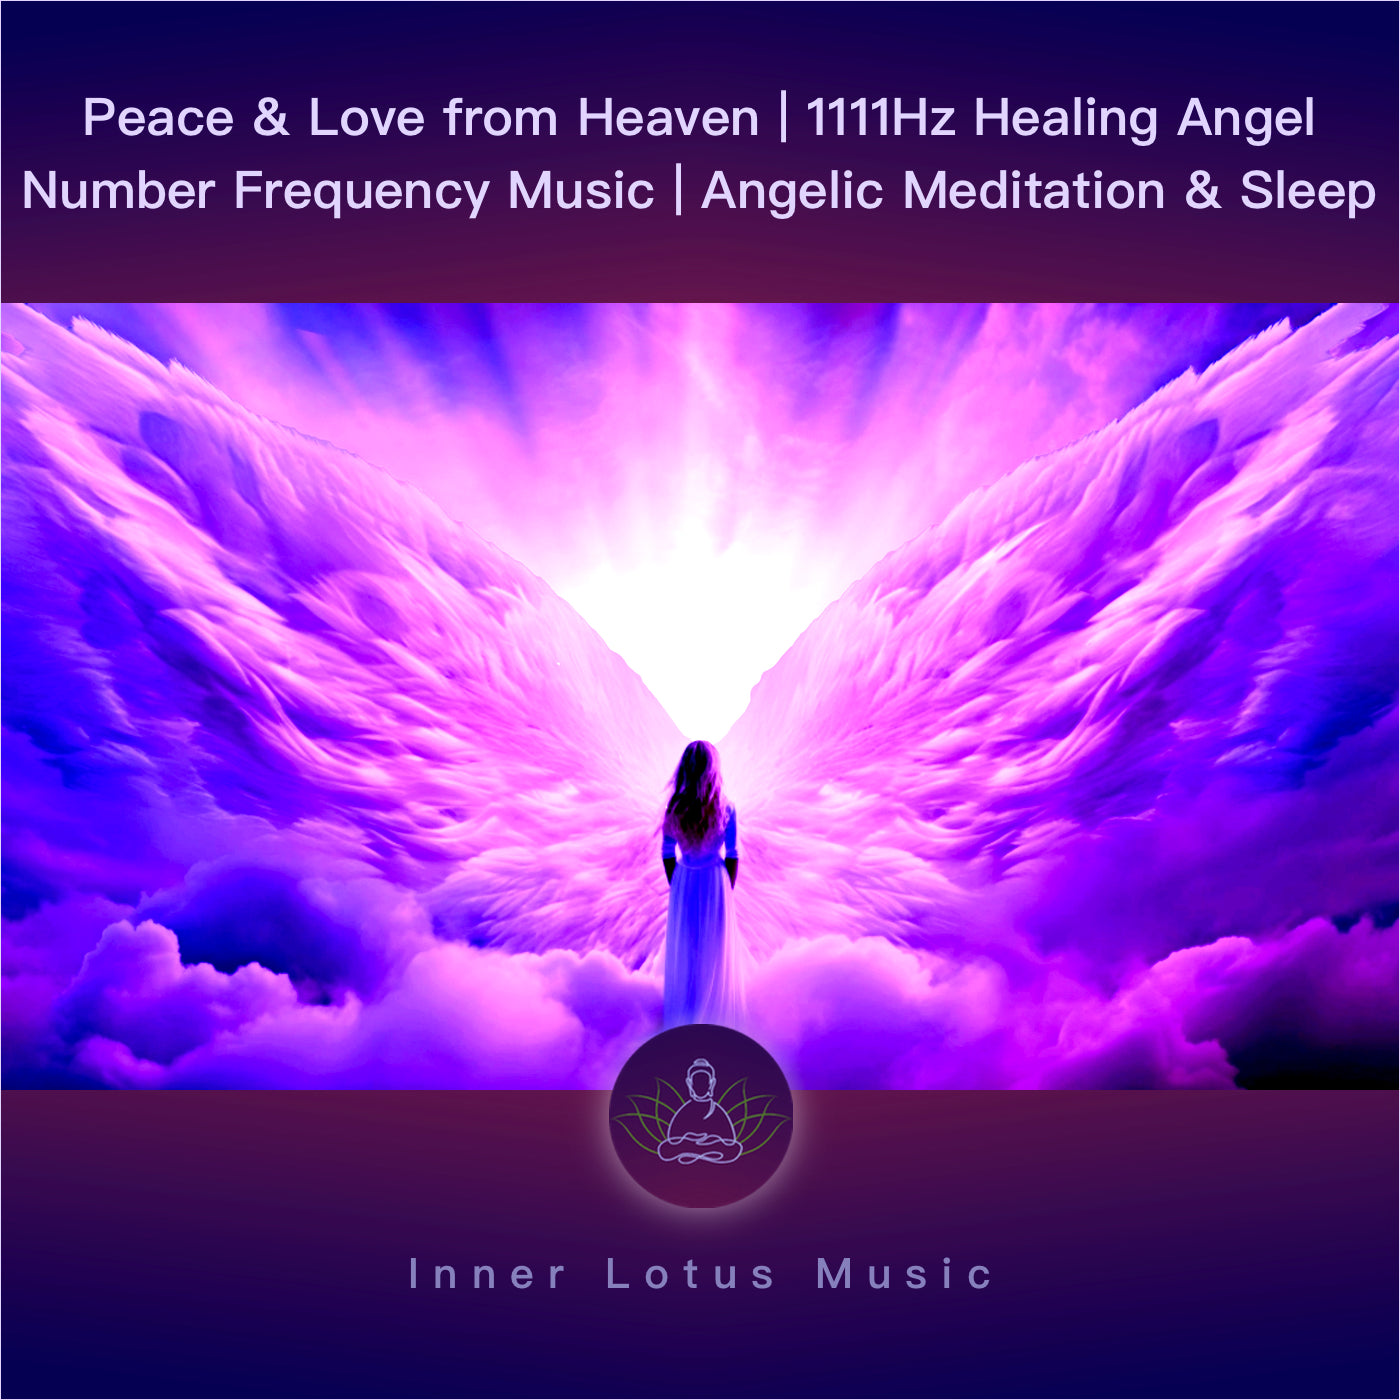 Peace & Love from Heaven | 1111Hz Healing Angel Number Frequency Music | Angelic Meditation & Sleep